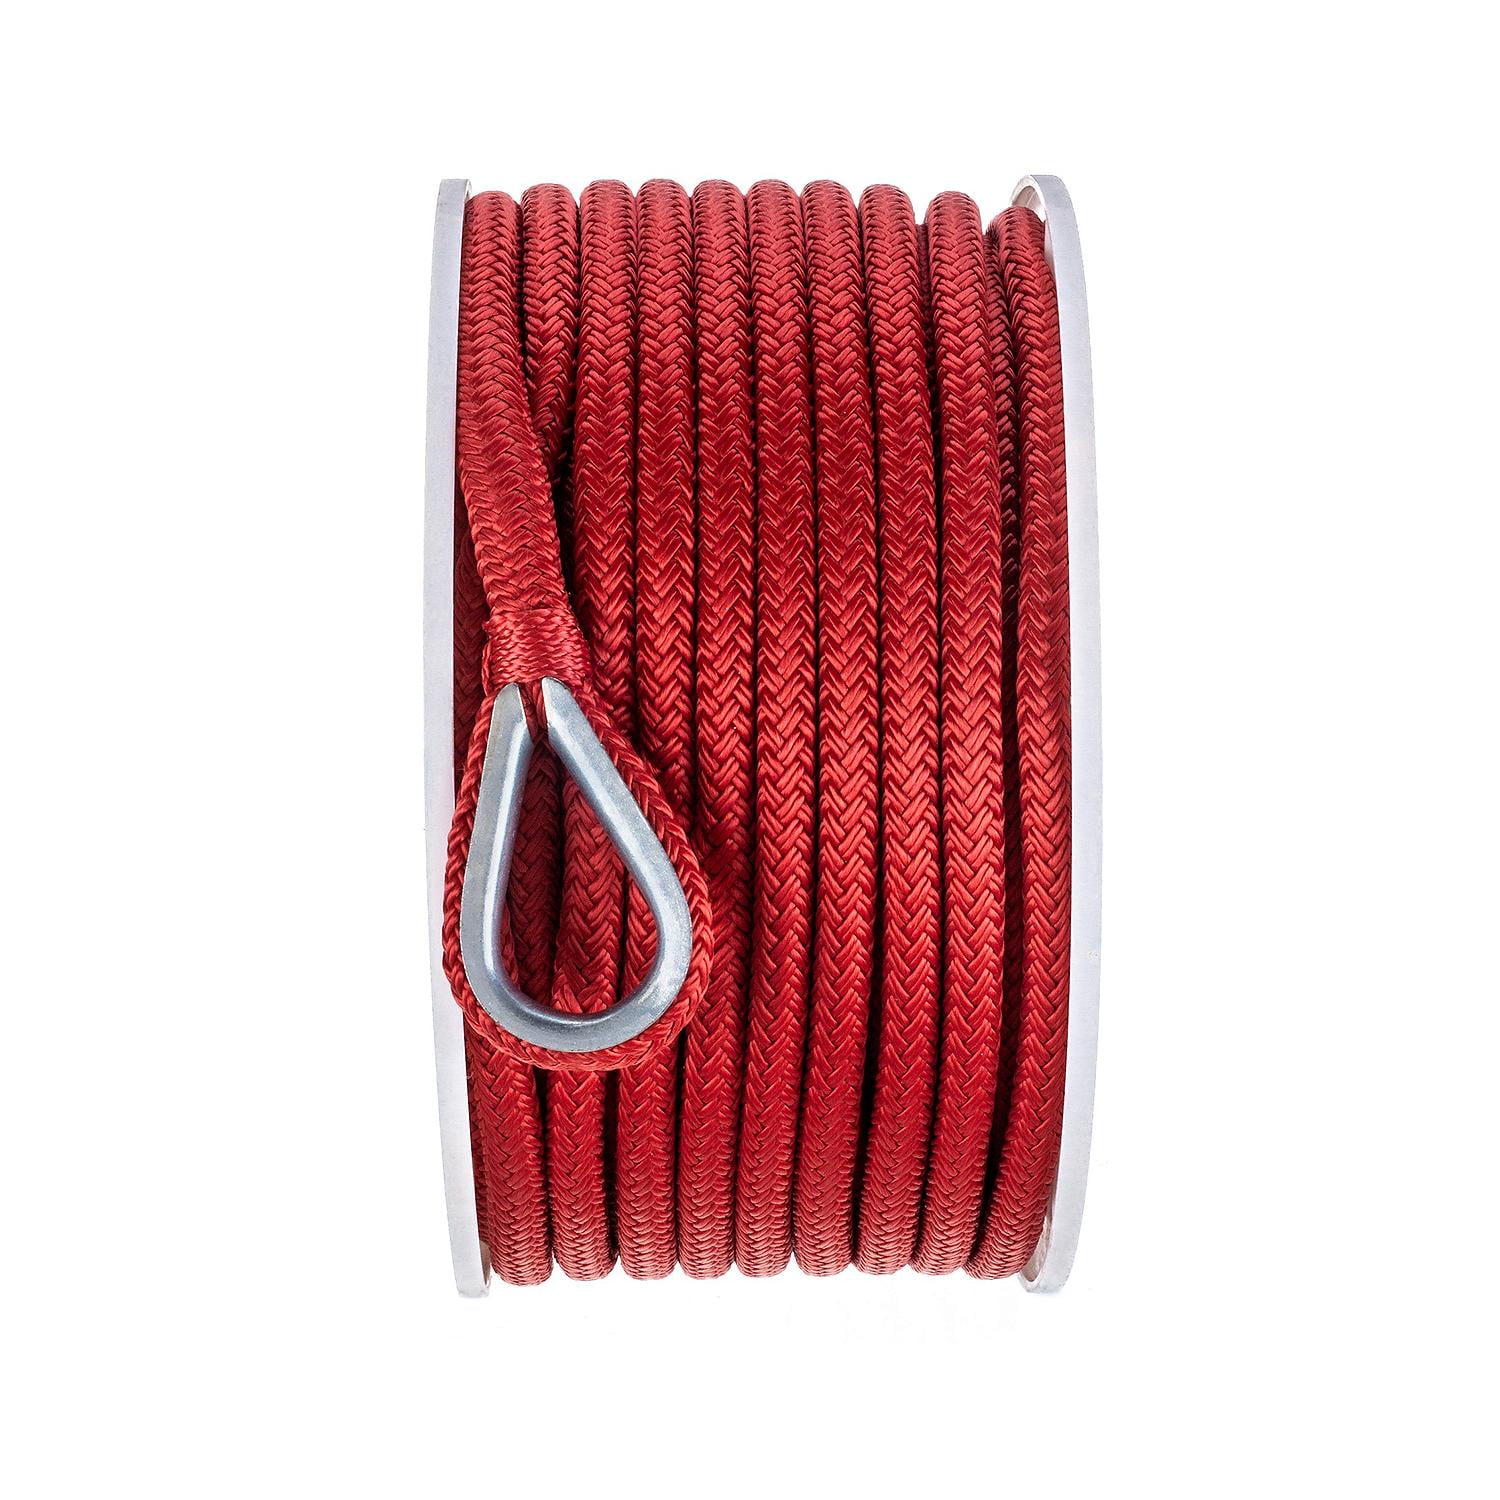 Seachoice Boat Anchor Rope, Double-Braid, Nylon, Achor Line, 3/8 In. X 100  Ft., Red 